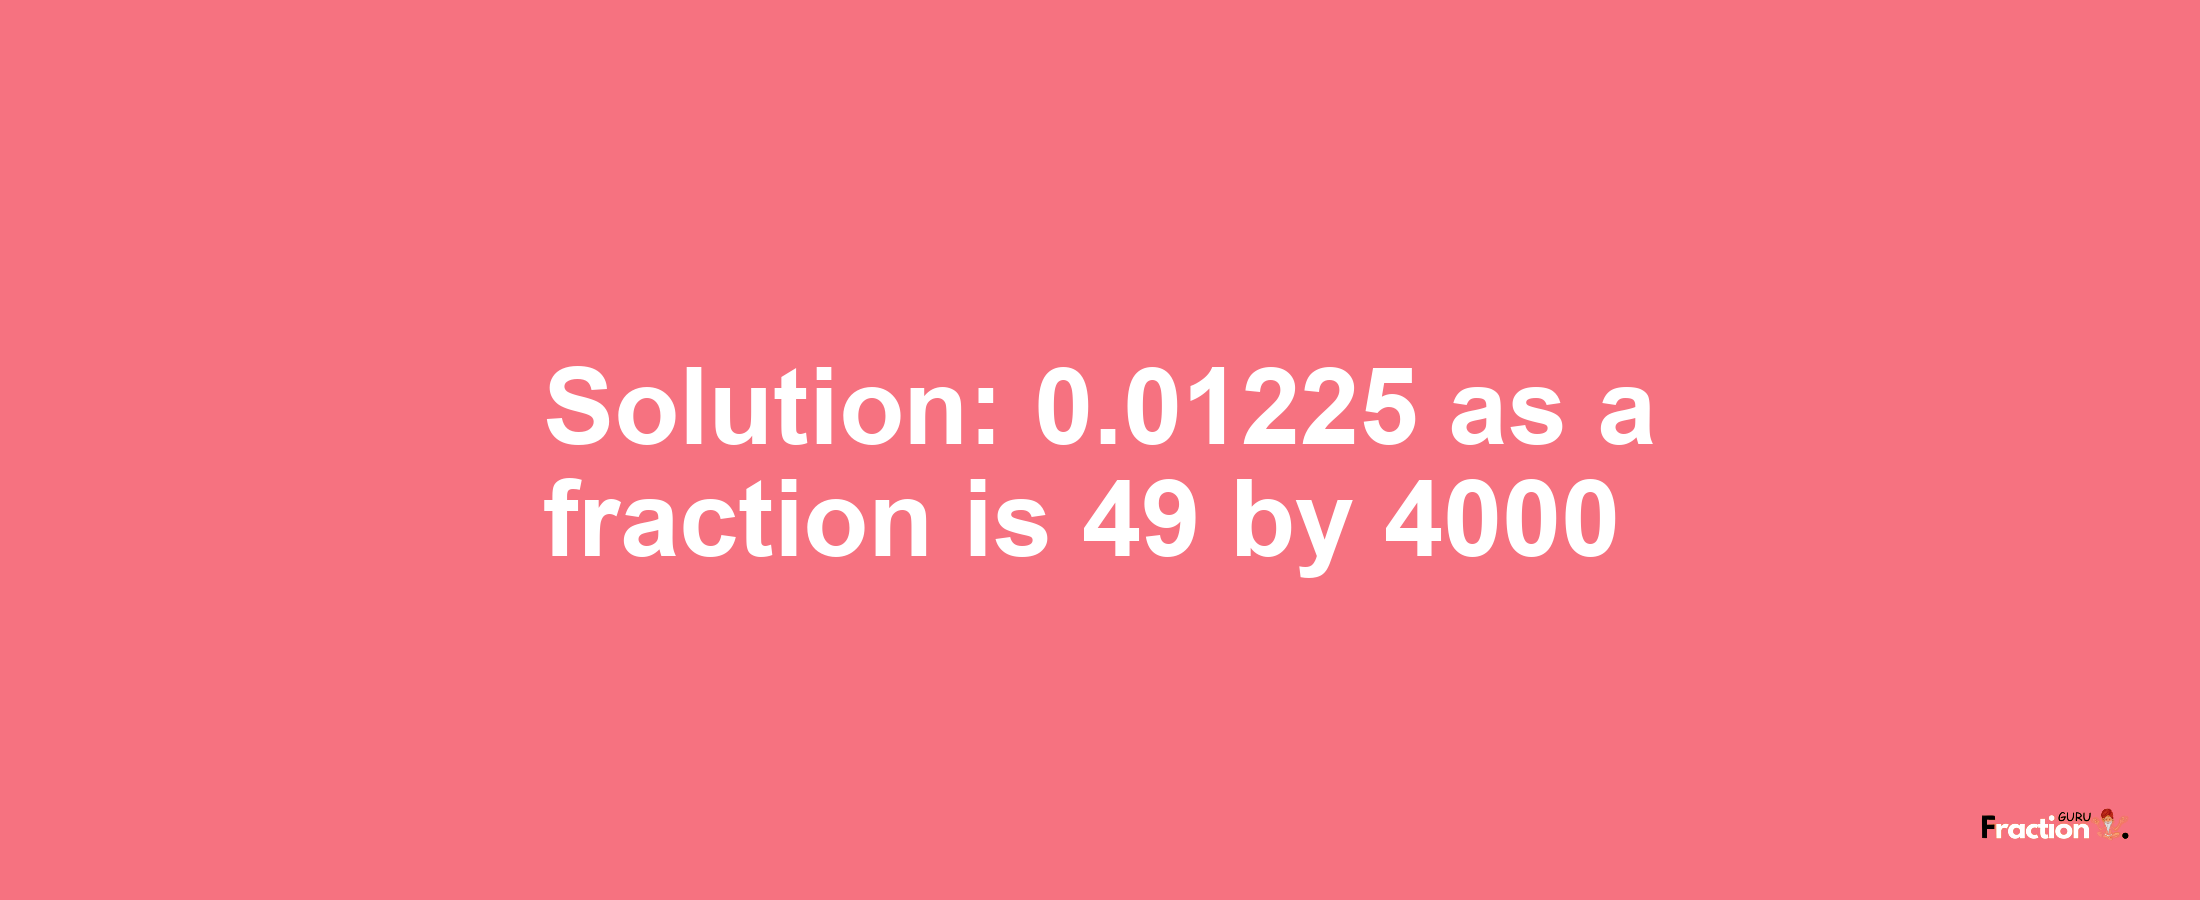 Solution:0.01225 as a fraction is 49/4000